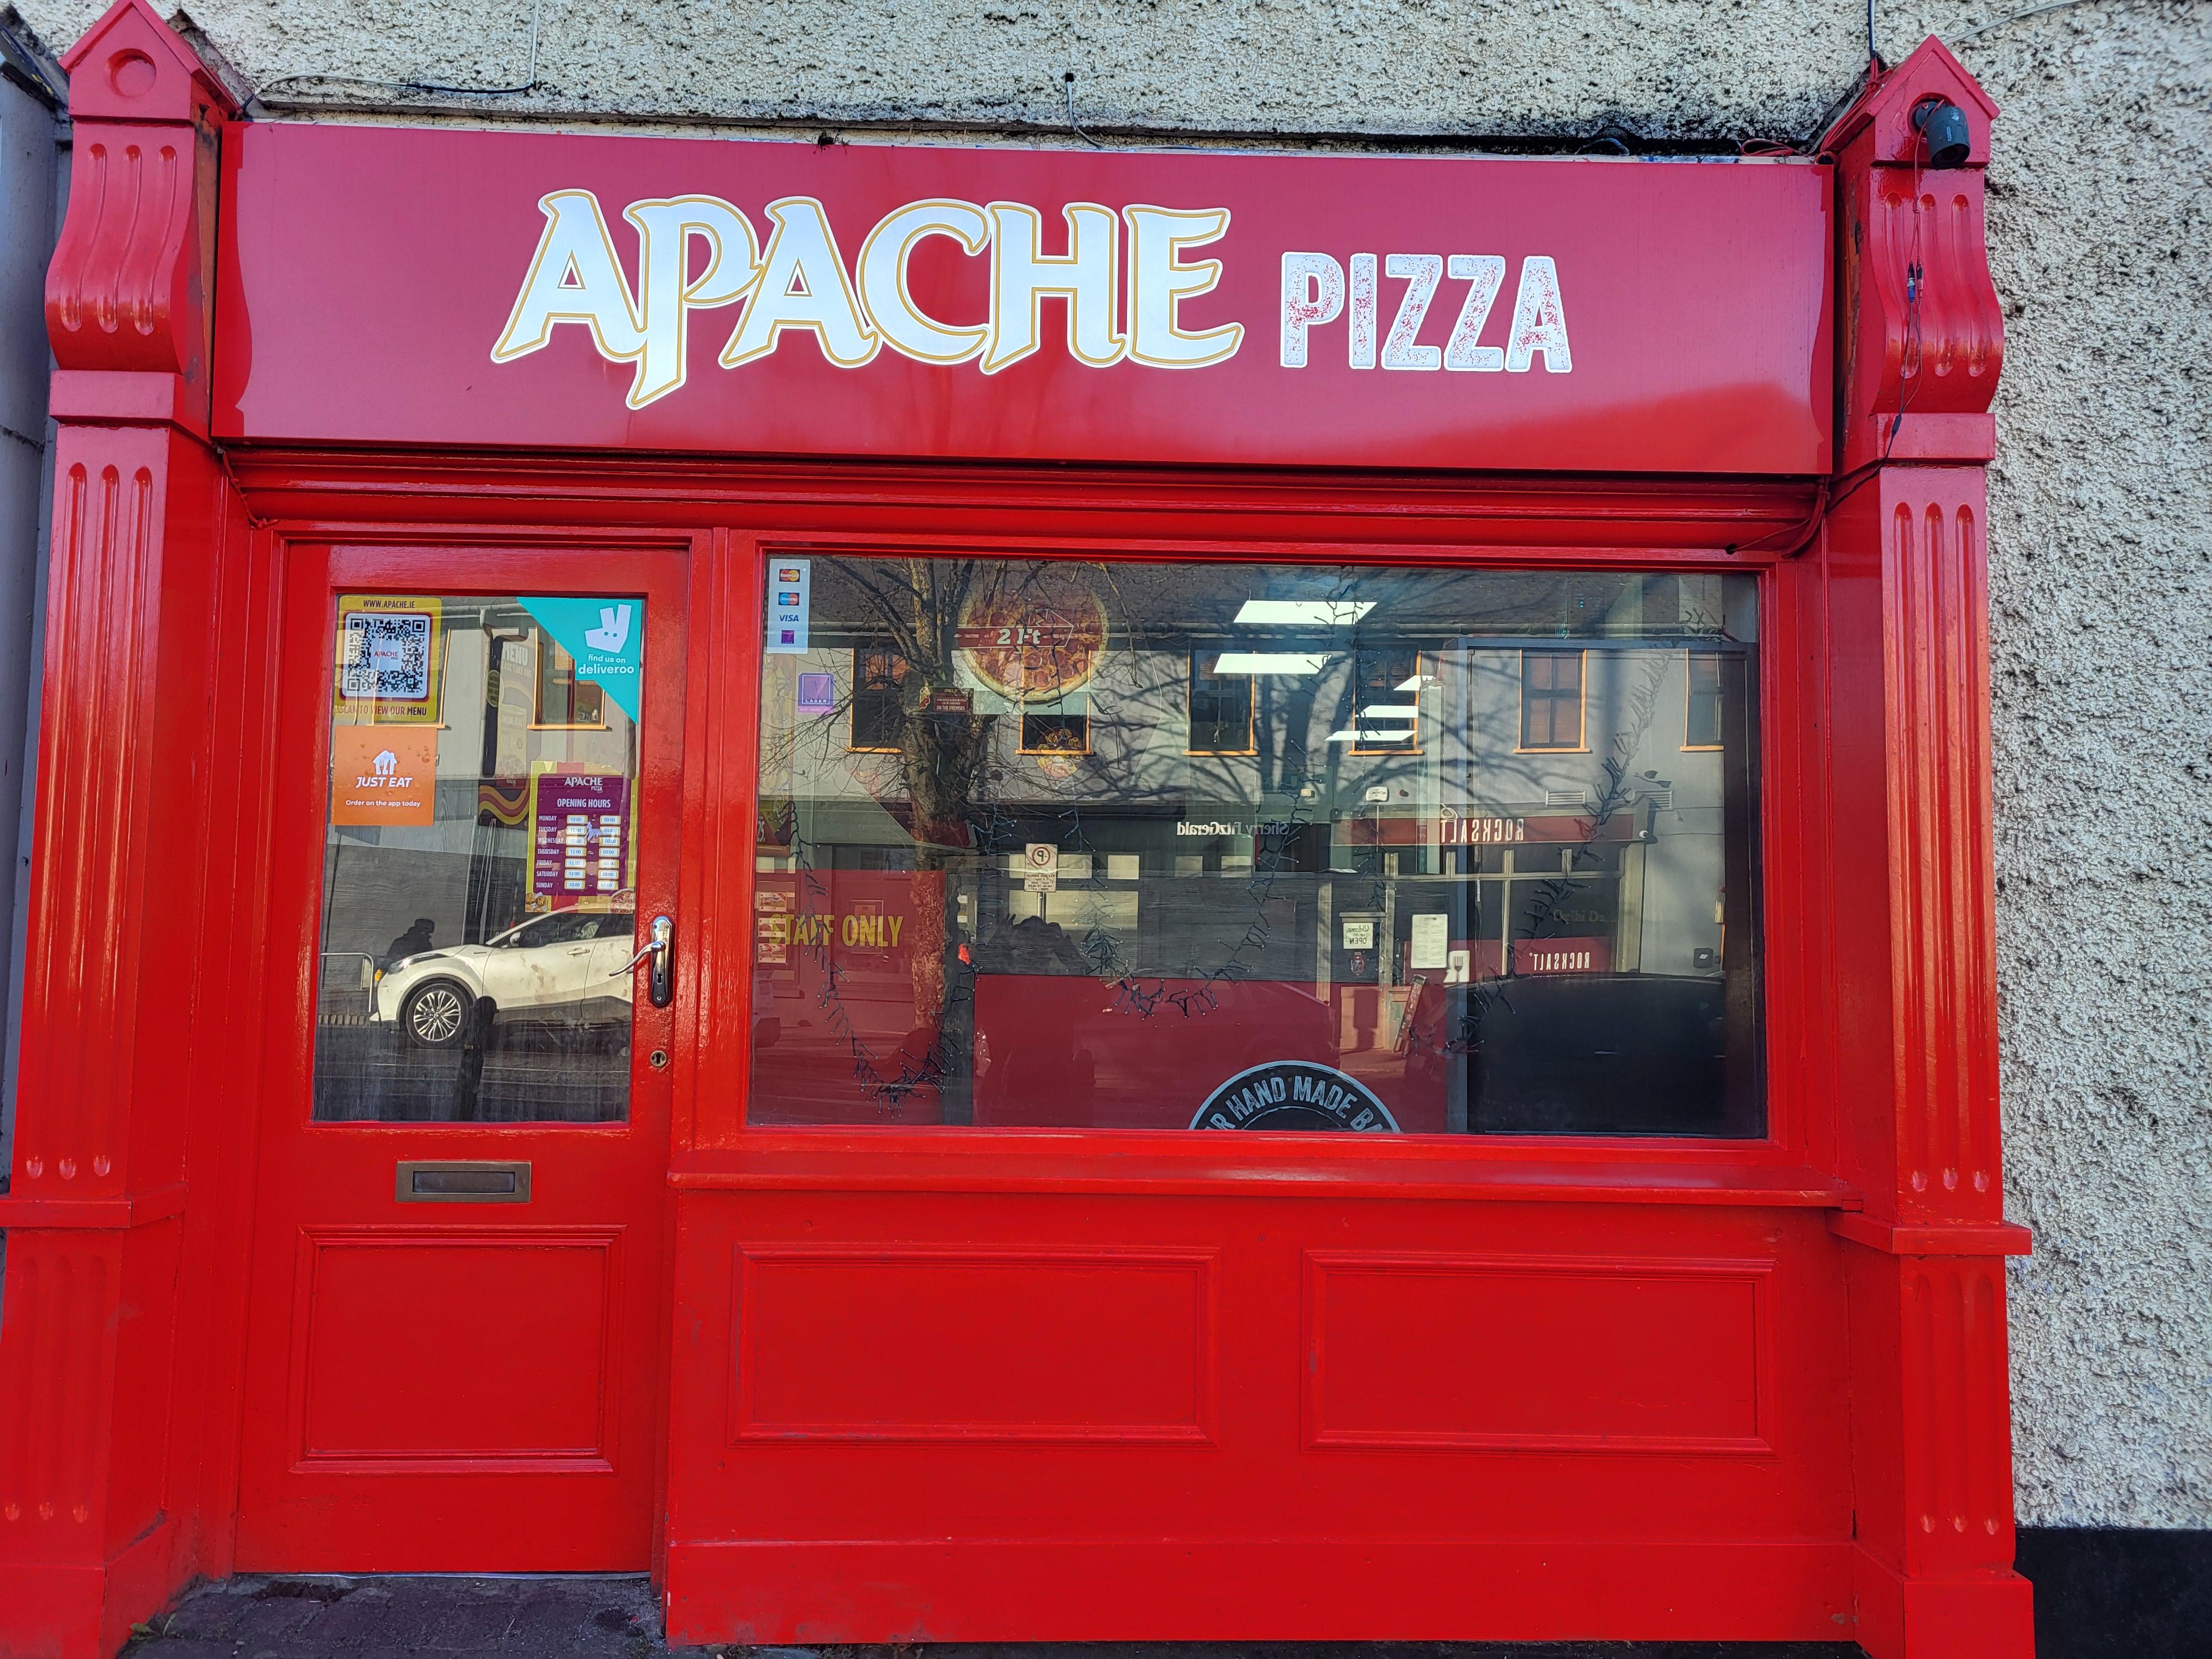 Apache Pizza Maynooth 4